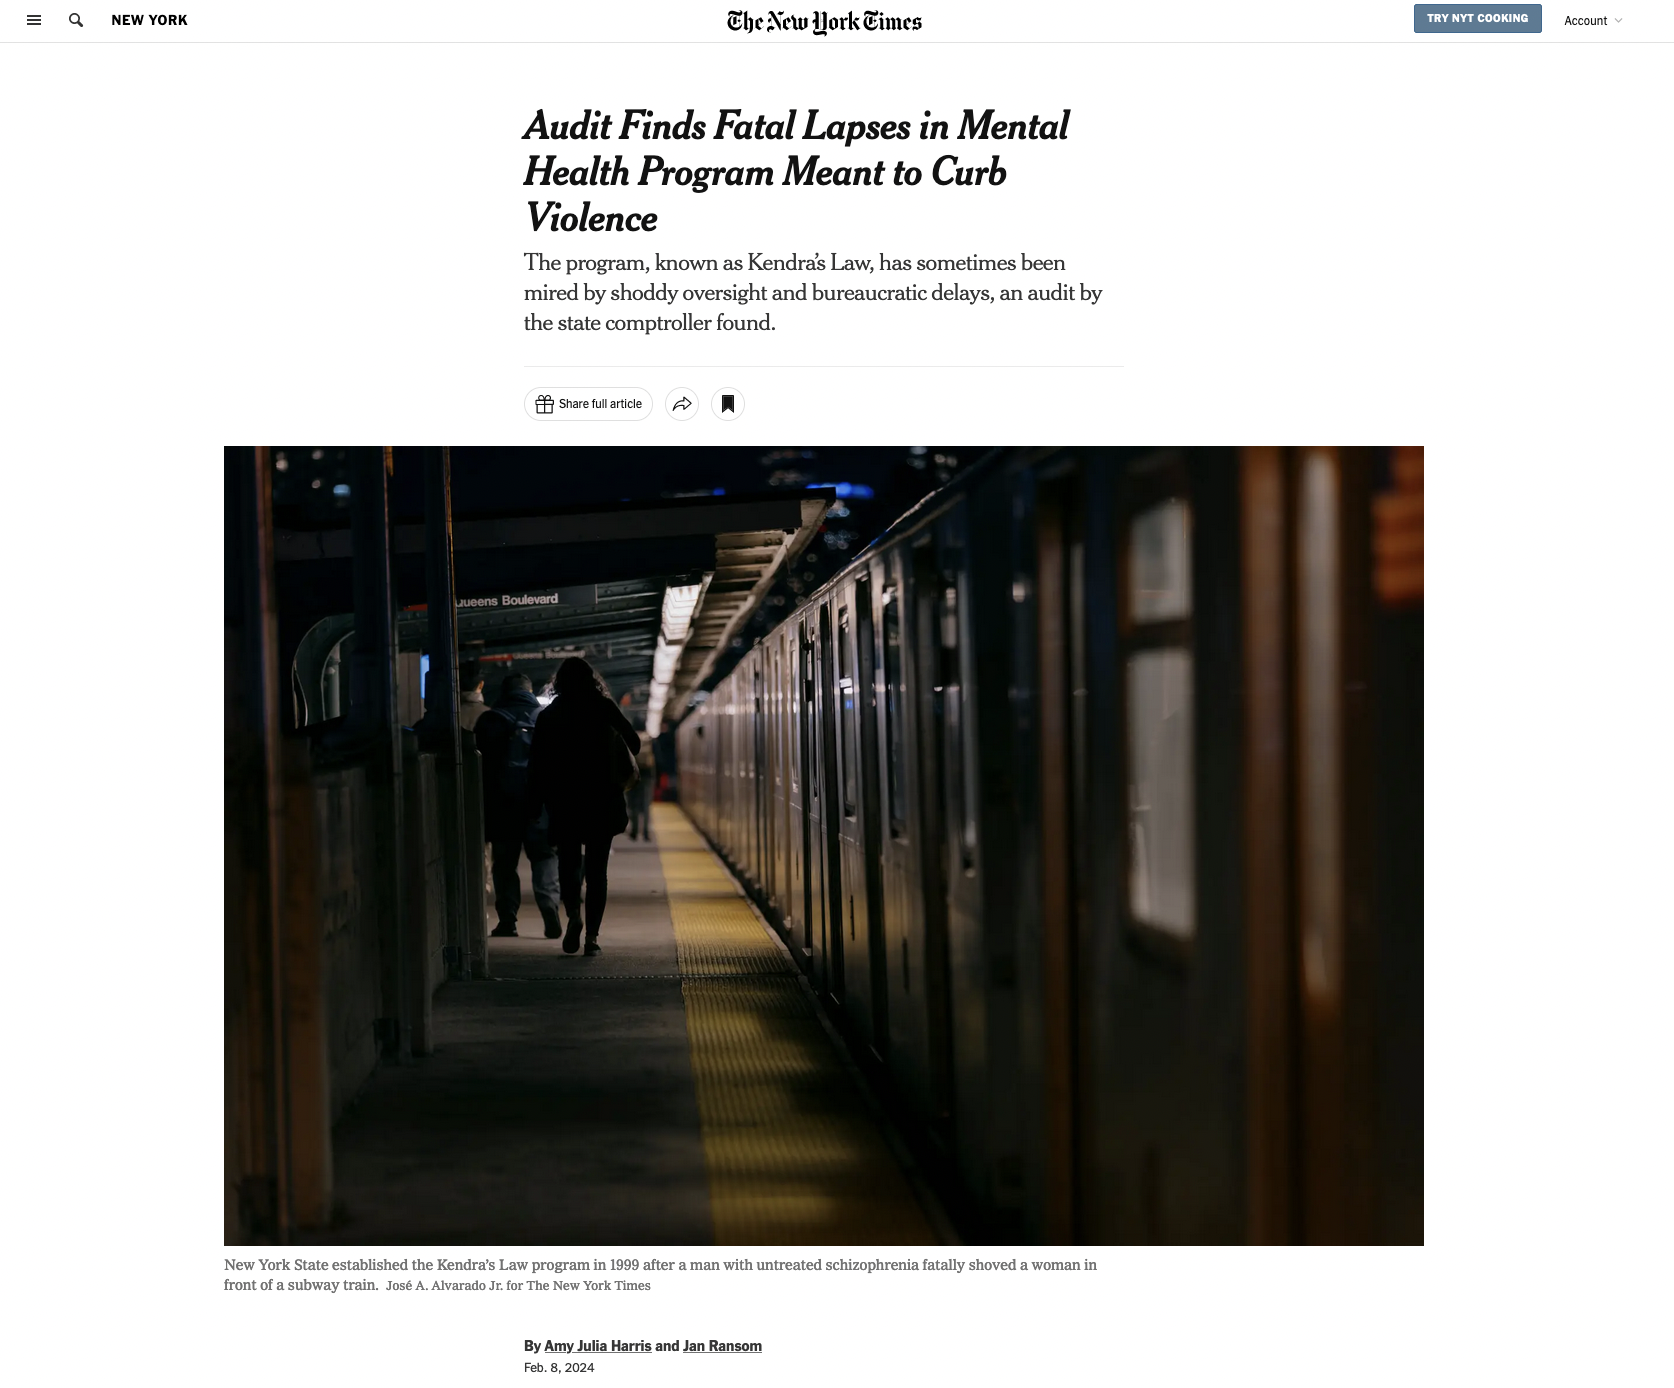 for The New York Times: Audit Finds Fatal Lapses in Mental Health Program Meant to Curb Violence